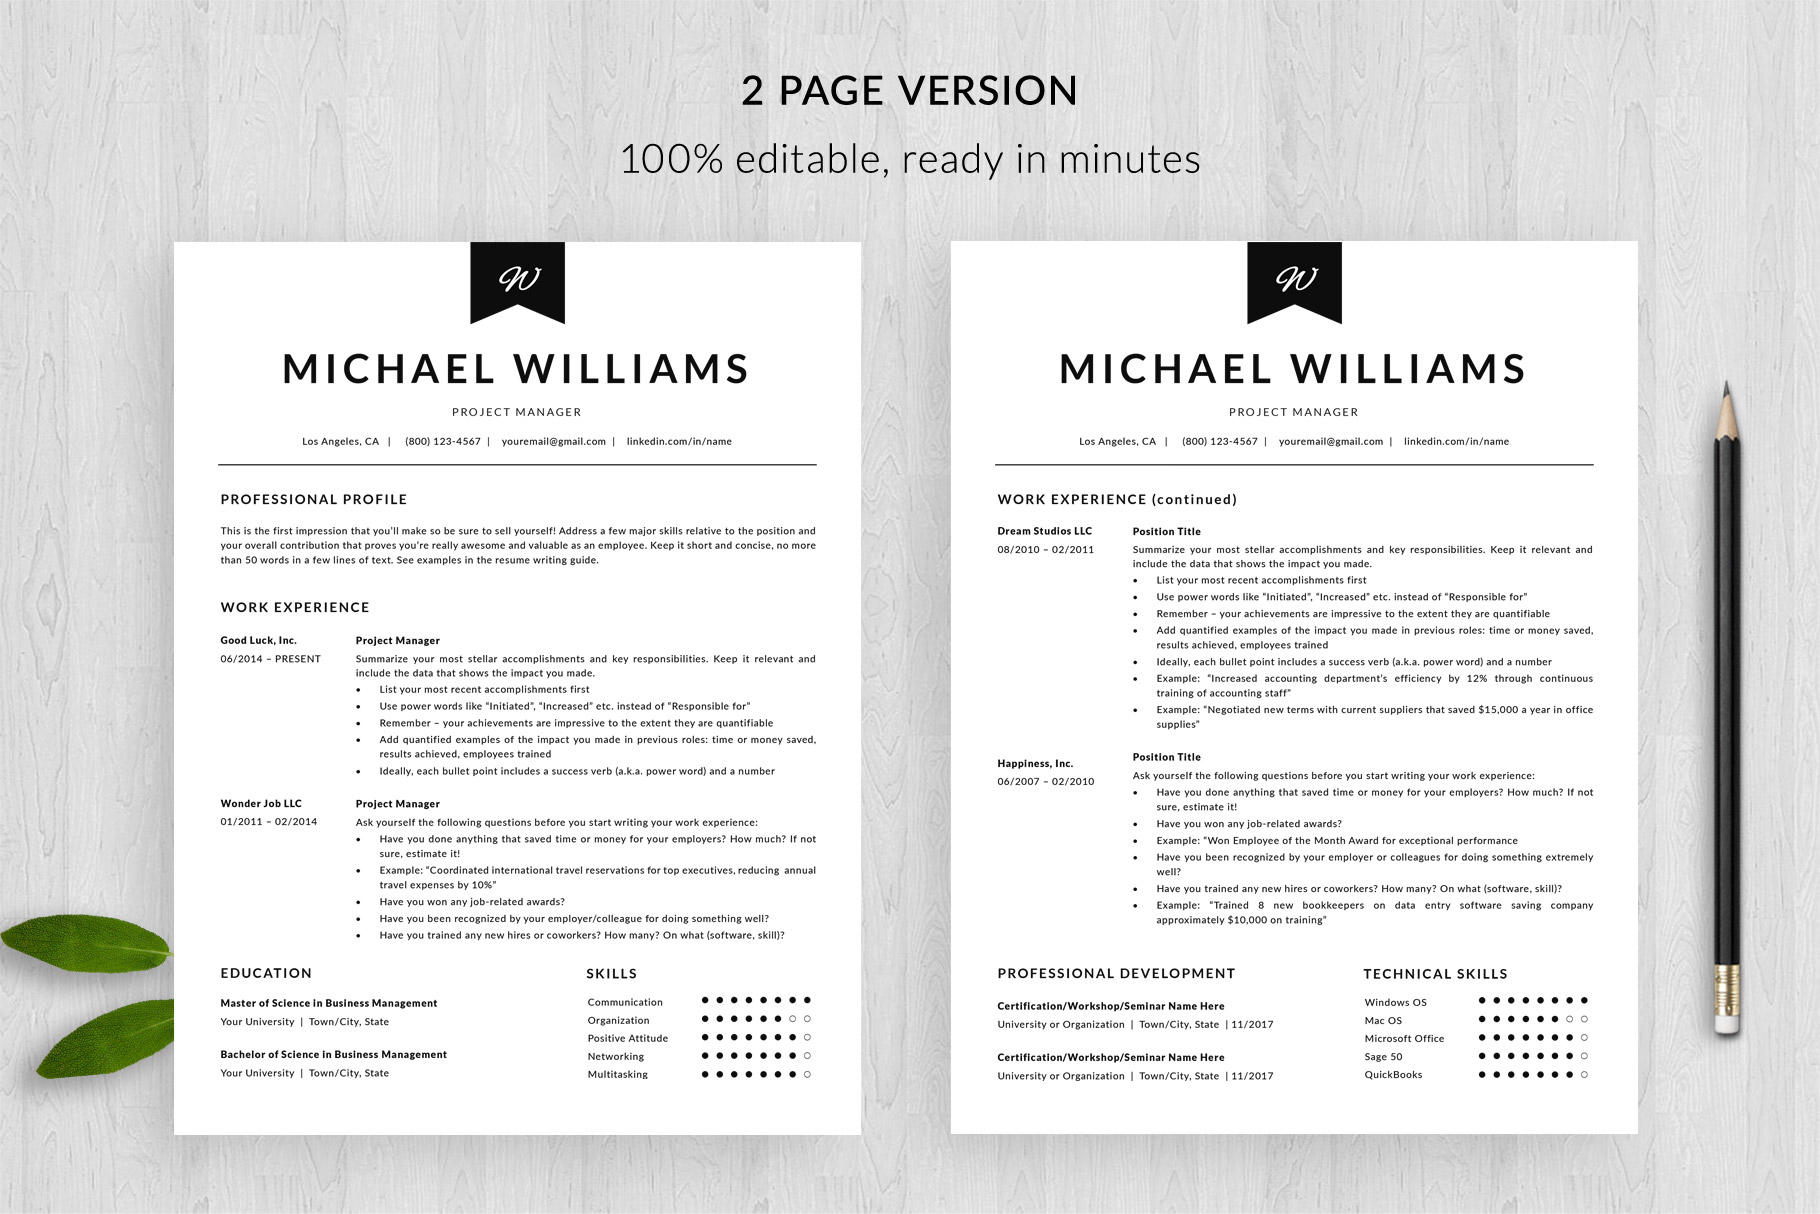 Two Page Resume 4 Two Page Resume Template Michael Templatehippo two page resume|wikiresume.com